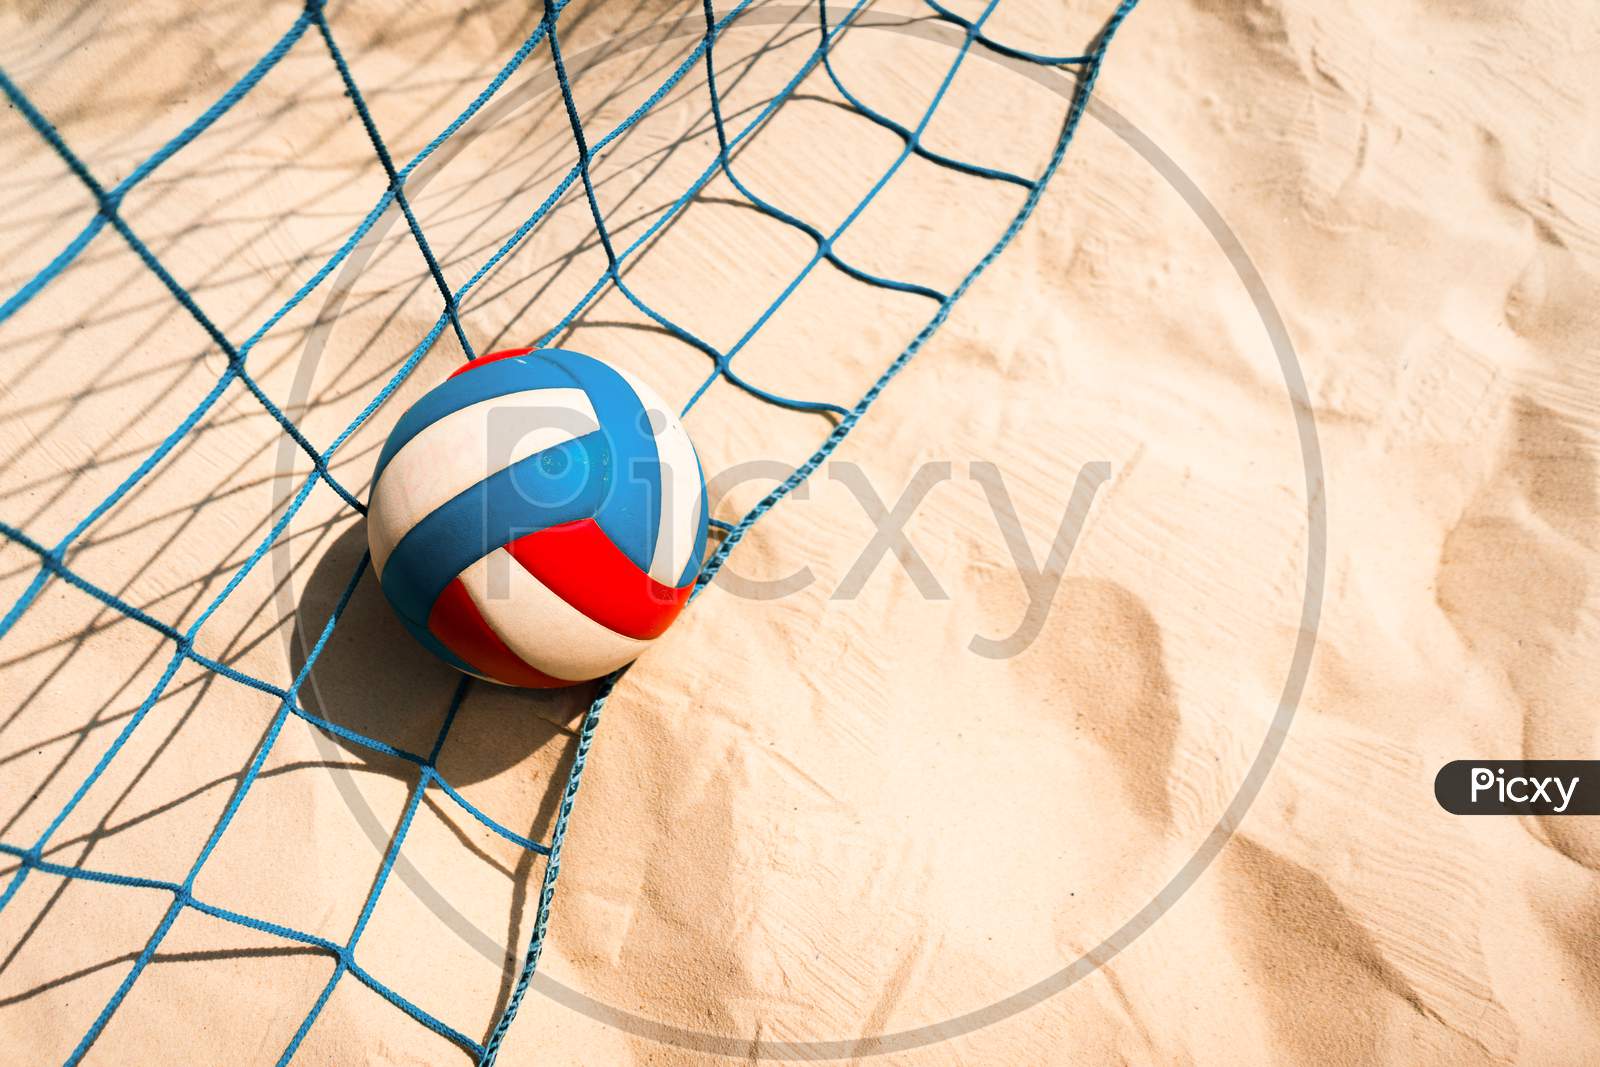 Volleyball and netting are on the beach